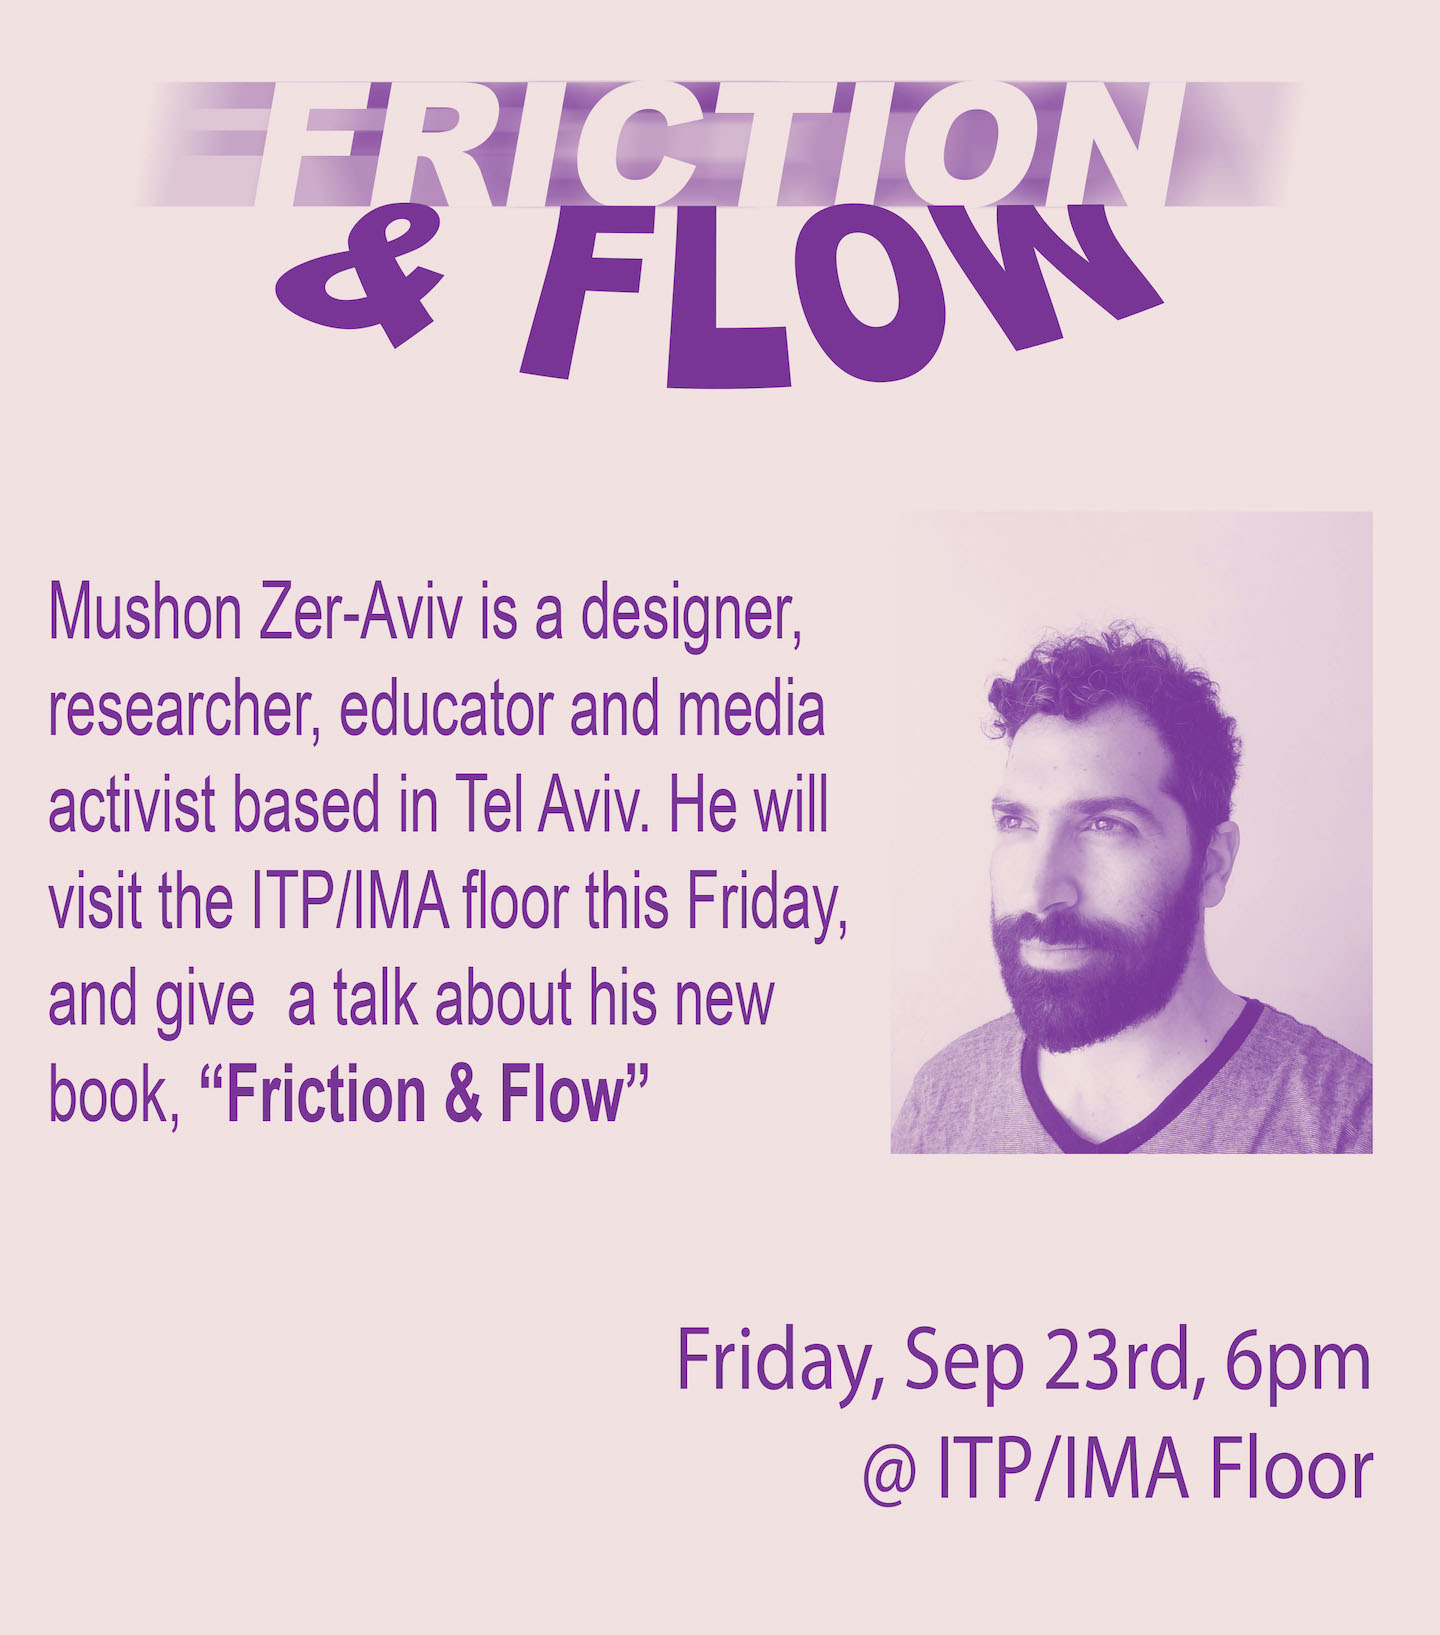 Mushon Zer-Aviv is a designer, researcher, educator and media activist based in Tel Aviv. His love/hate relationship with data informs his design work, art pieces, activism, research, teaching, workshops & city life. Mushon is currently writing a non-fiction book on Friction and Flow — a political design theory of change.